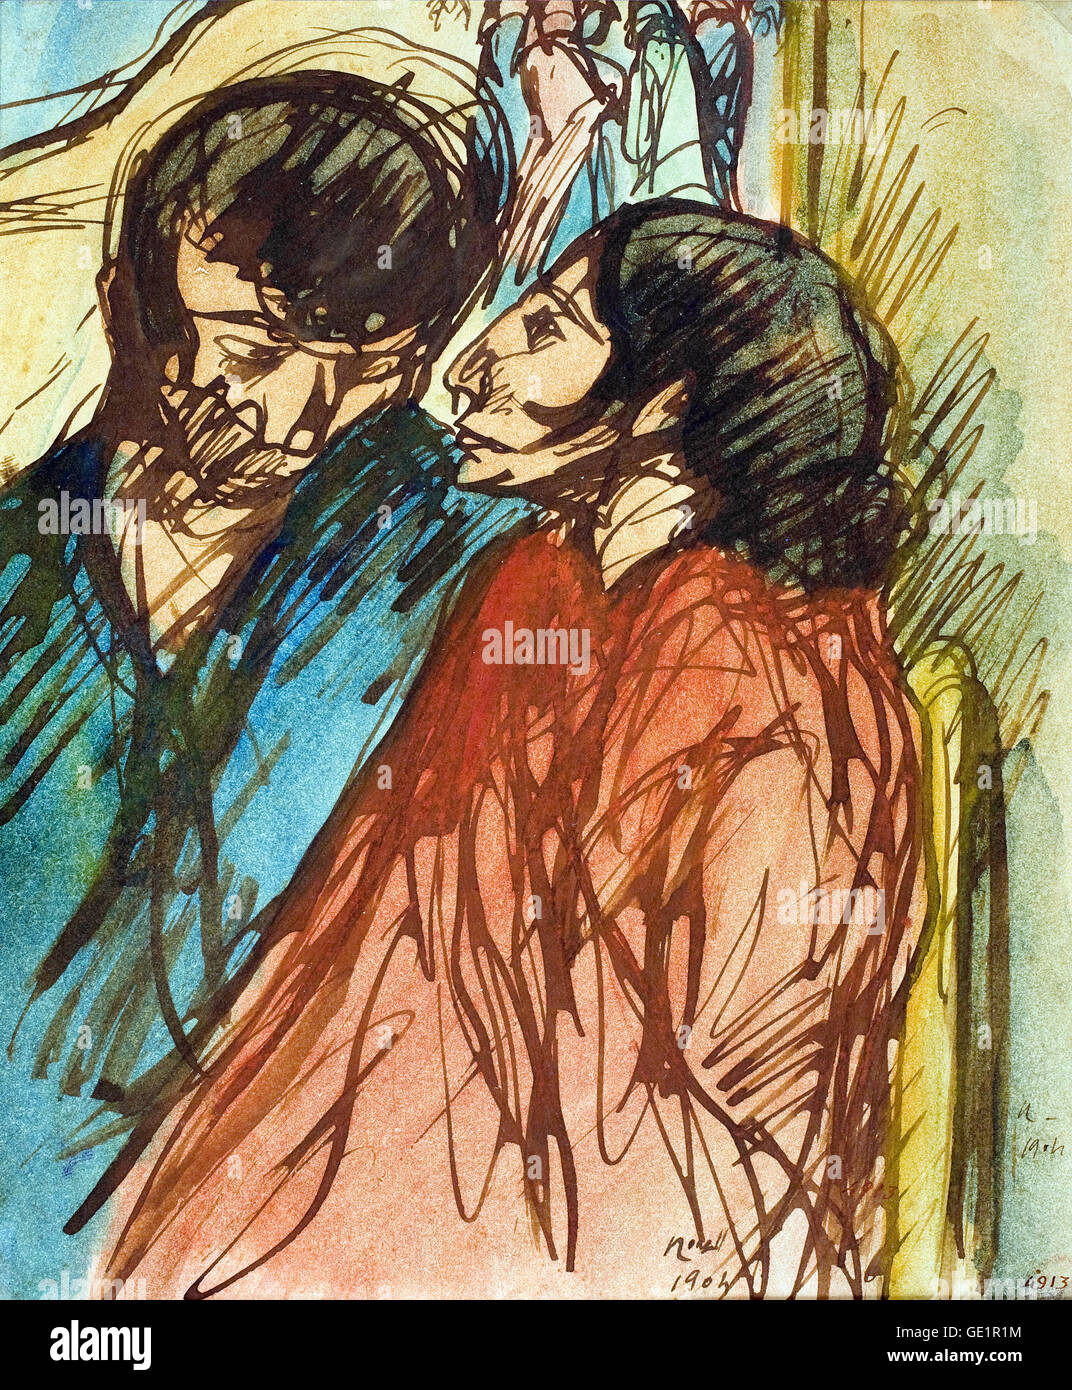 Isidre Nonell, Gypsy Couple 1904 Drawing, pencil and watercolor on paper. Museu Nacional d'Art de Catalunya, Barcelona, Spain. Stock Photo